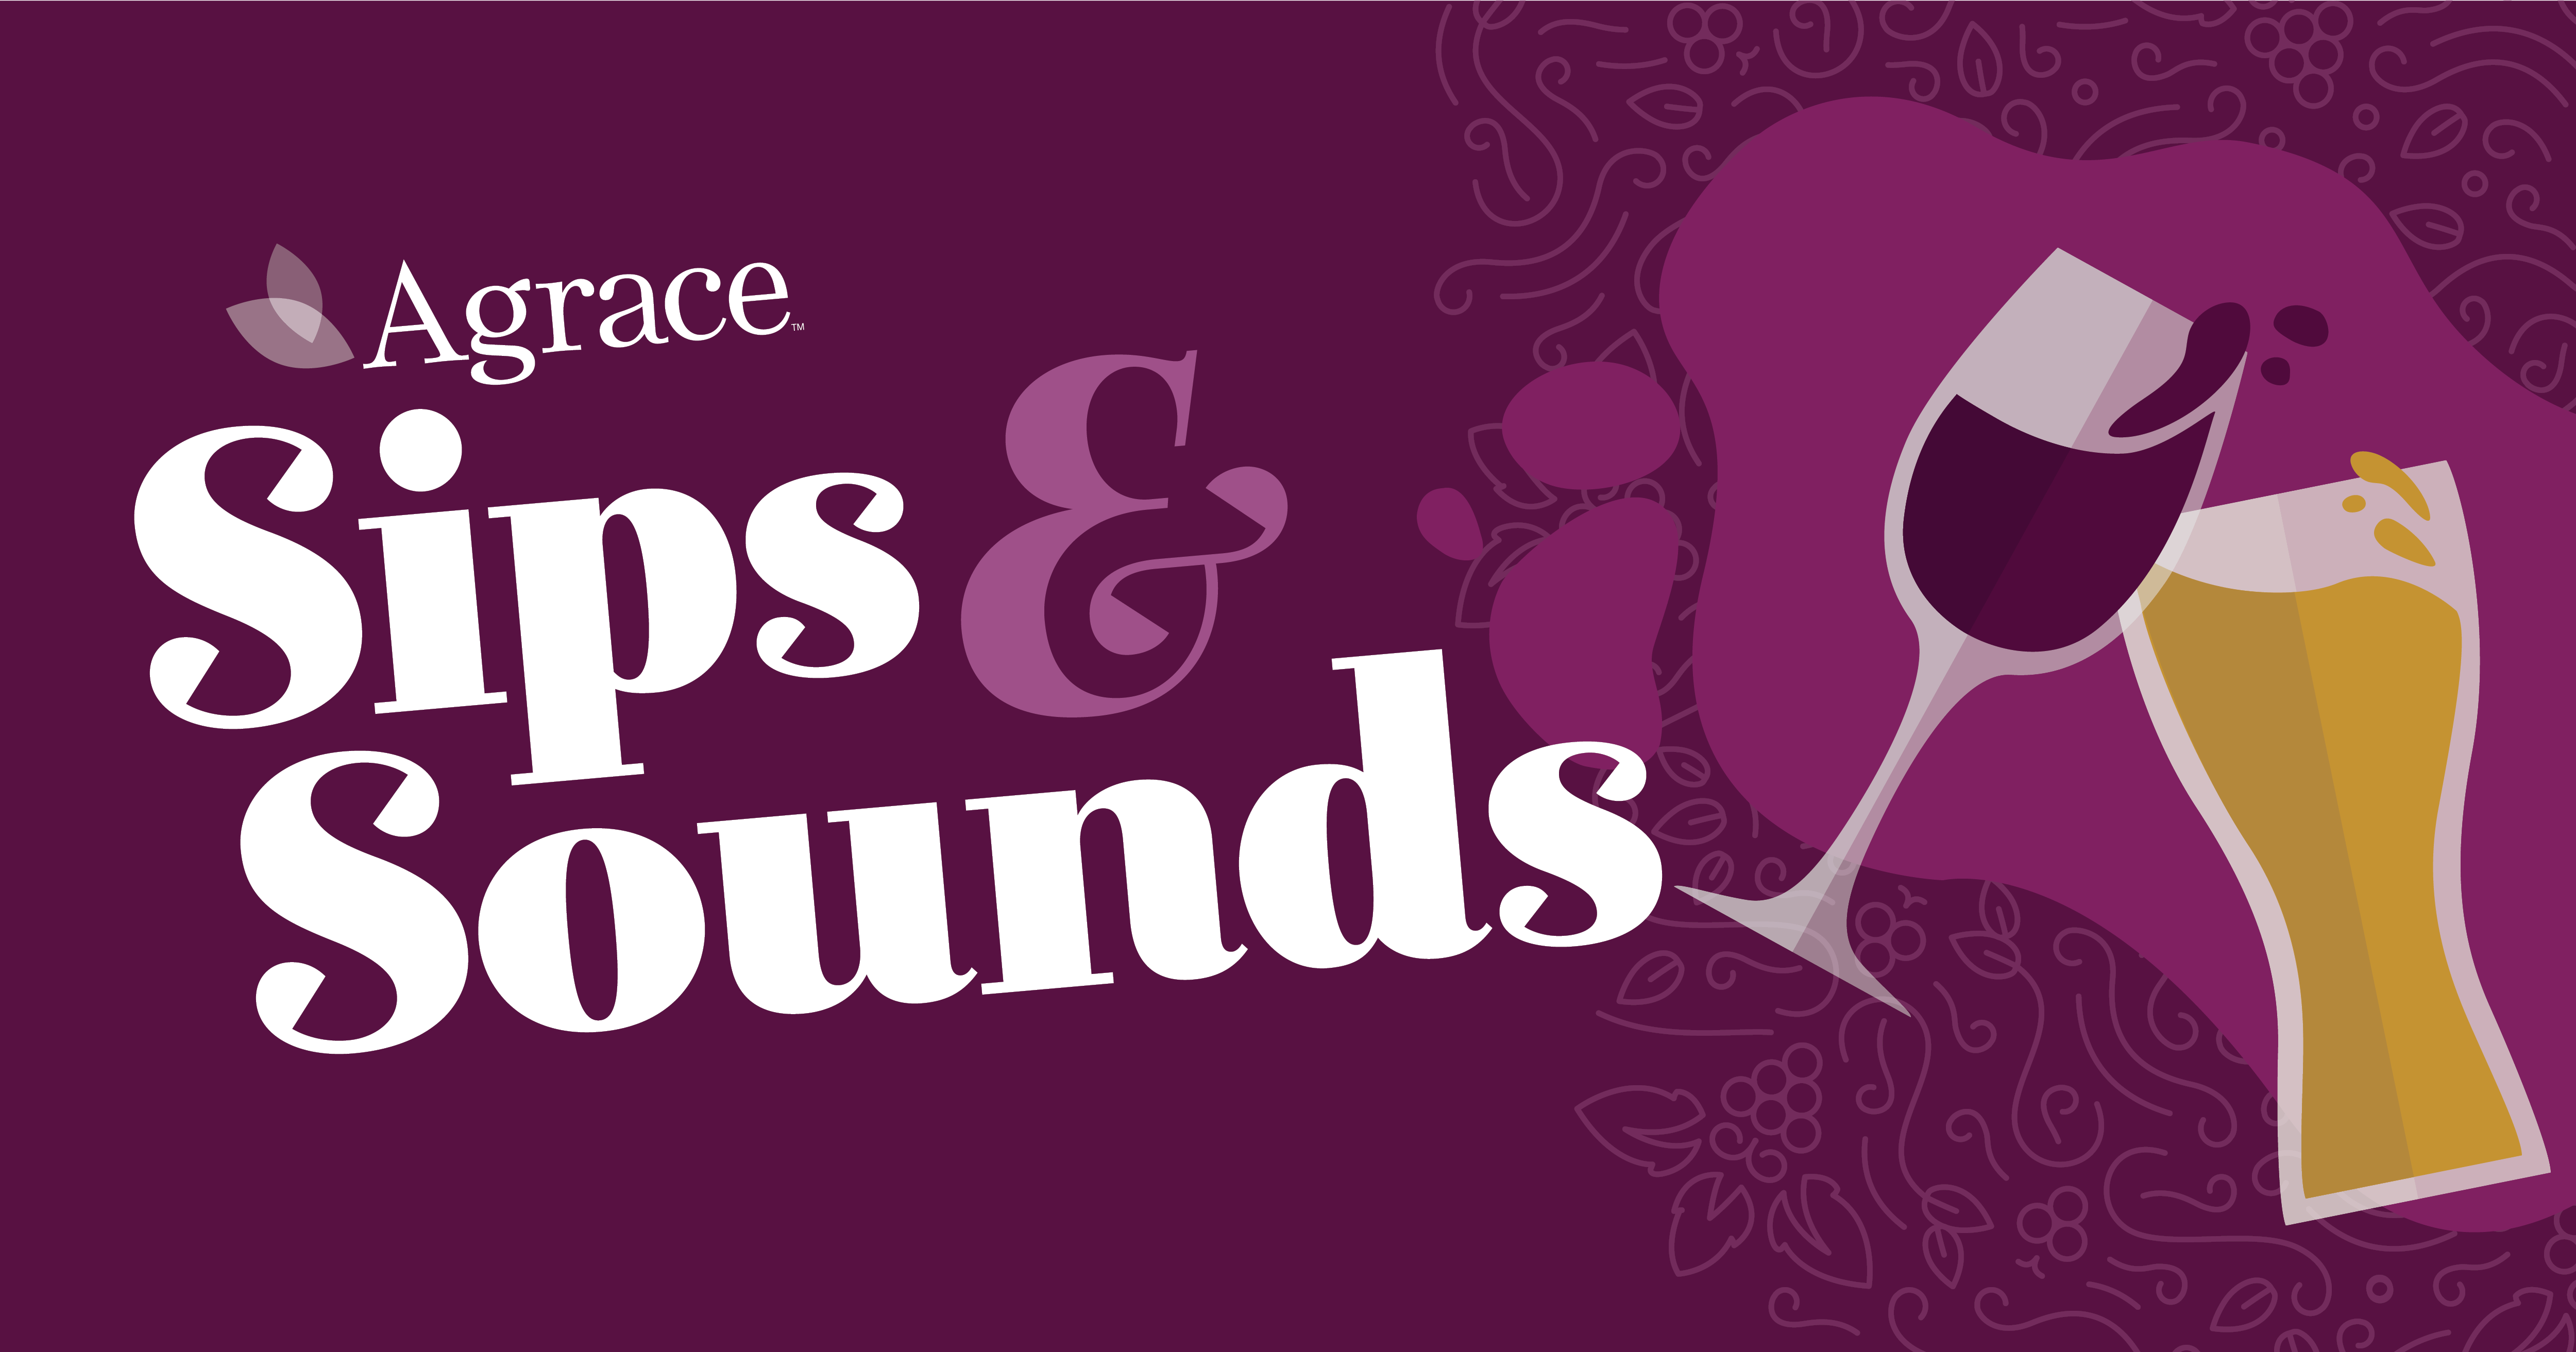 sips-sounds-event-image